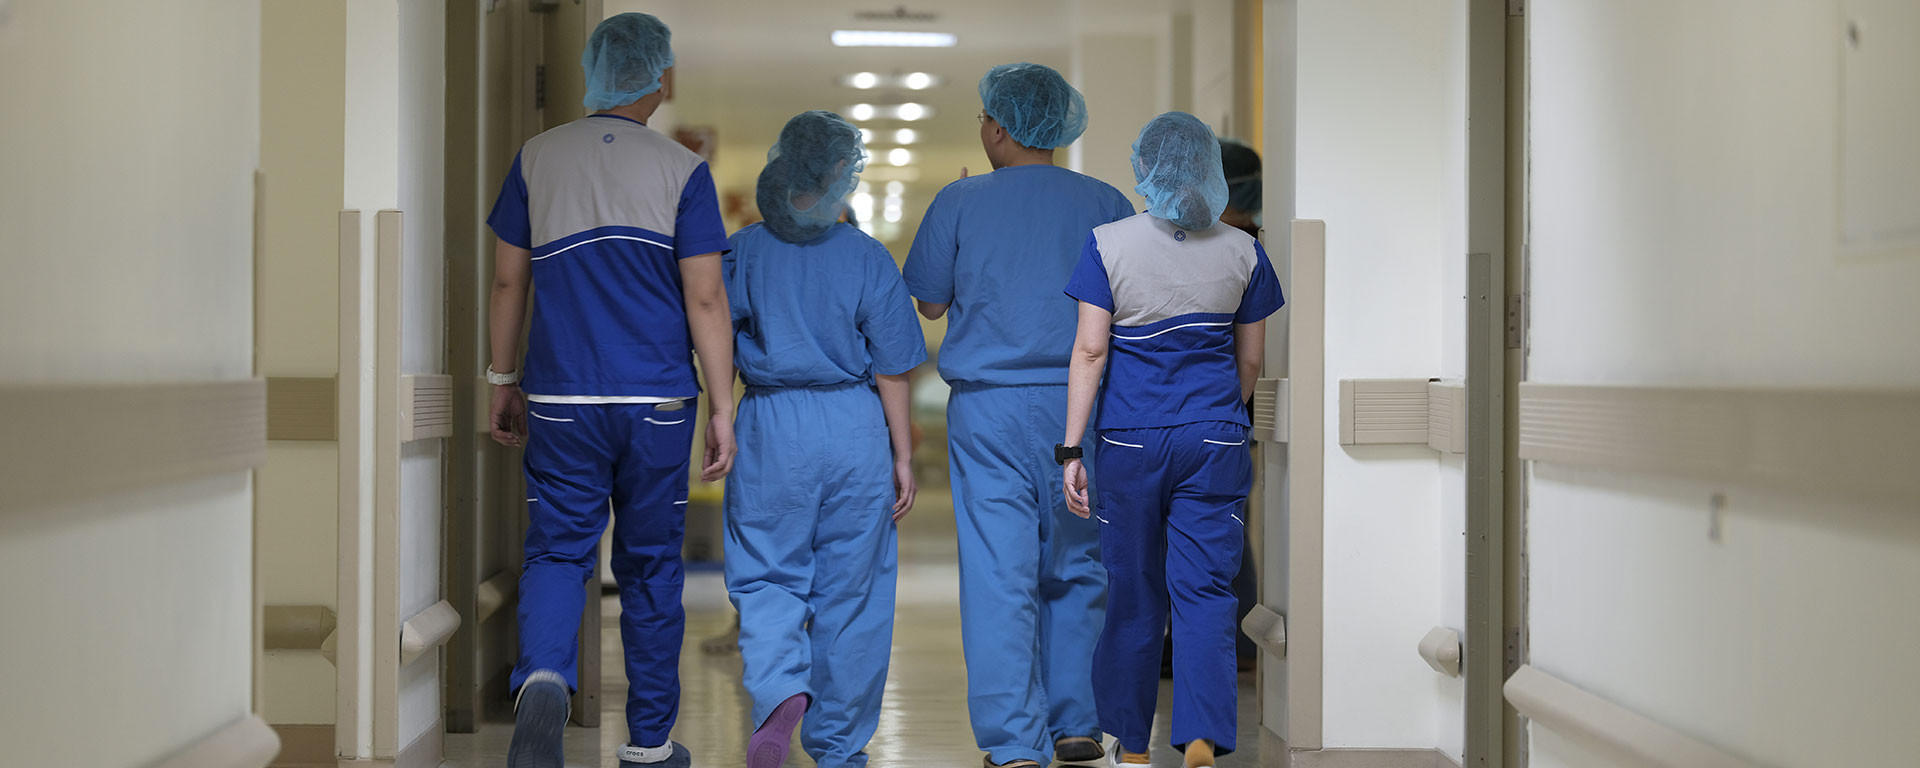 group of medical personnel walking down the hospital hallway